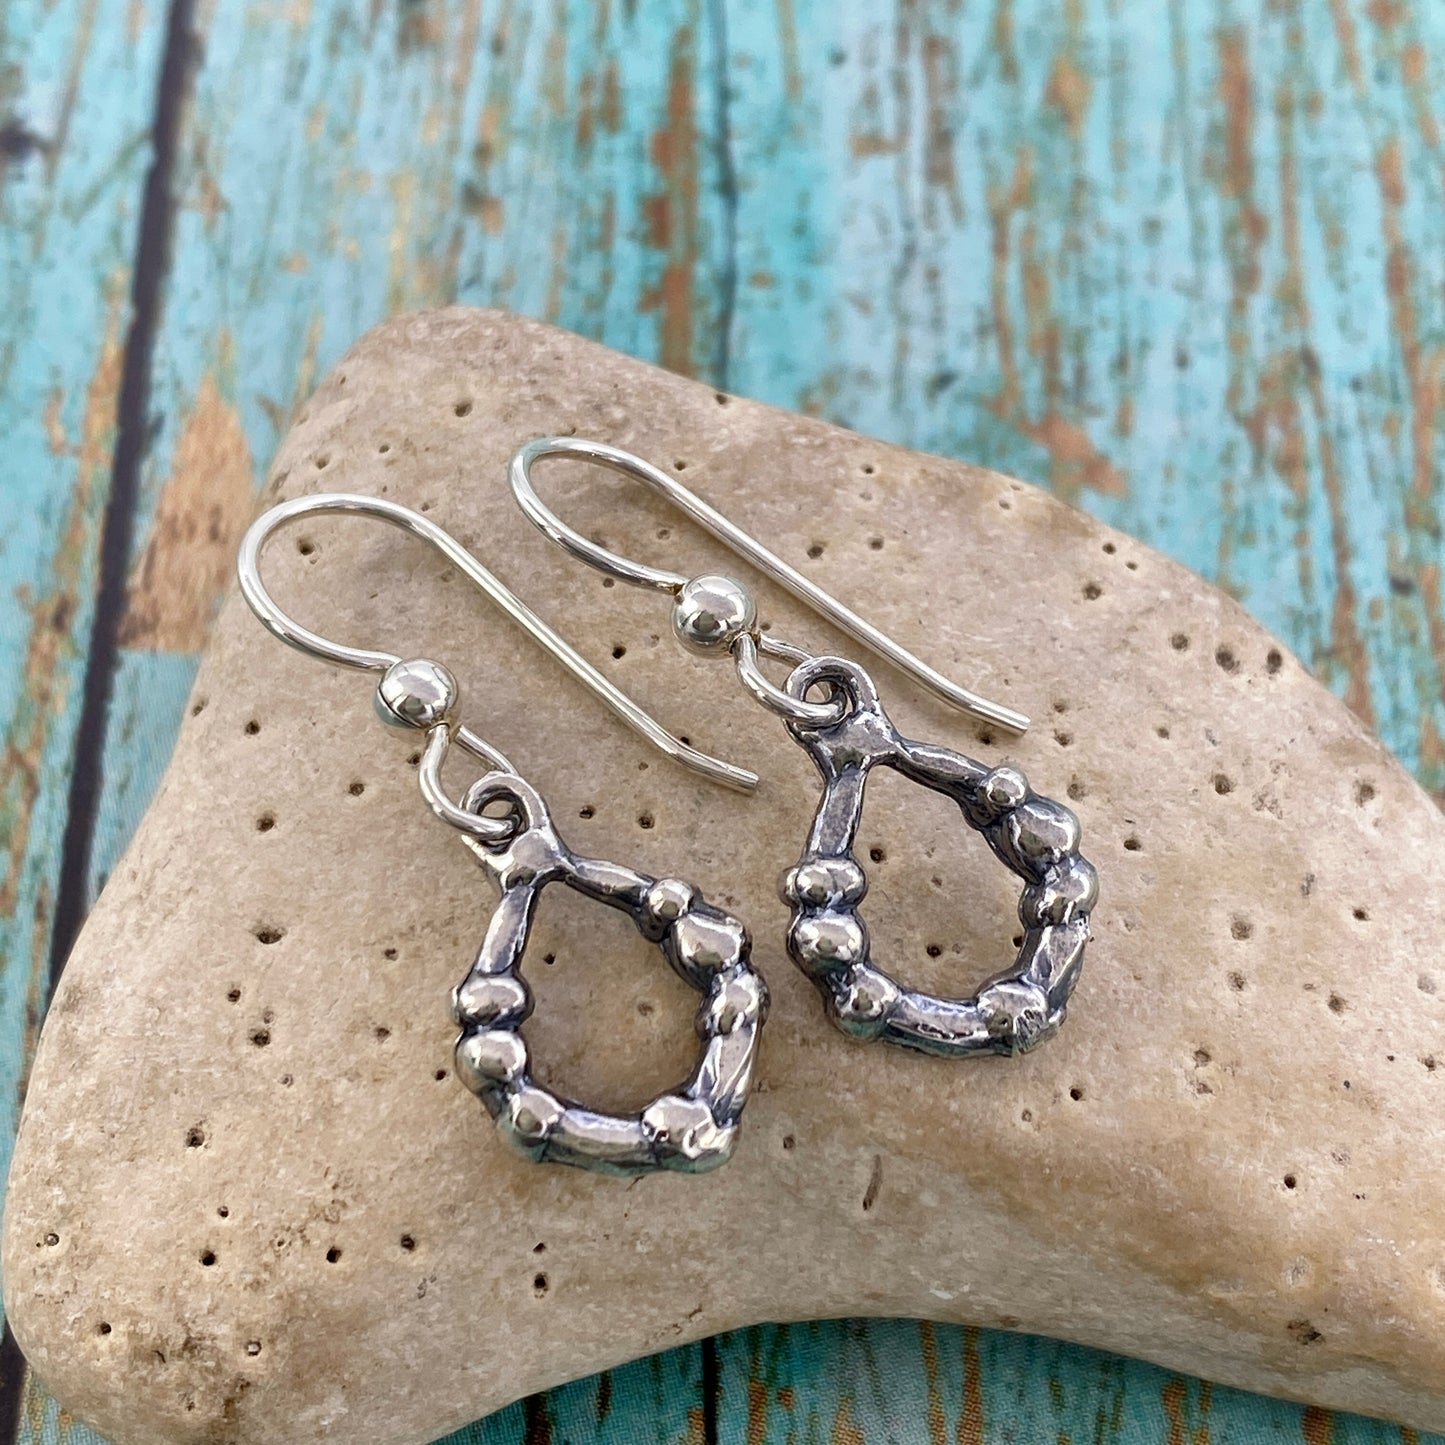 Rings of silver with dots - Sterling silver Earrings on French posts or Ear threaders